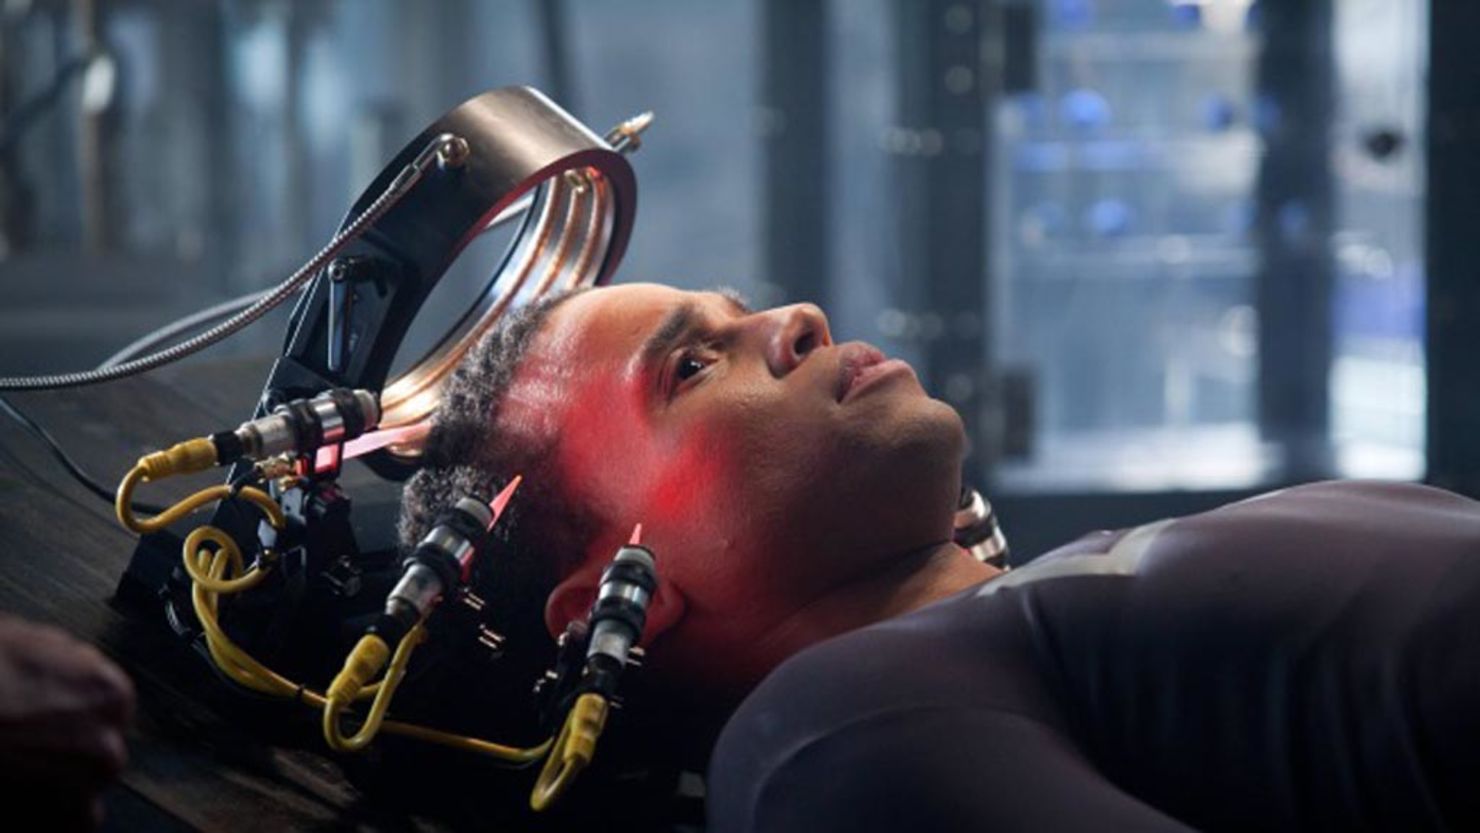 Michael Ealy was one of the stars of Fox's robot cop drama "Almost Human."